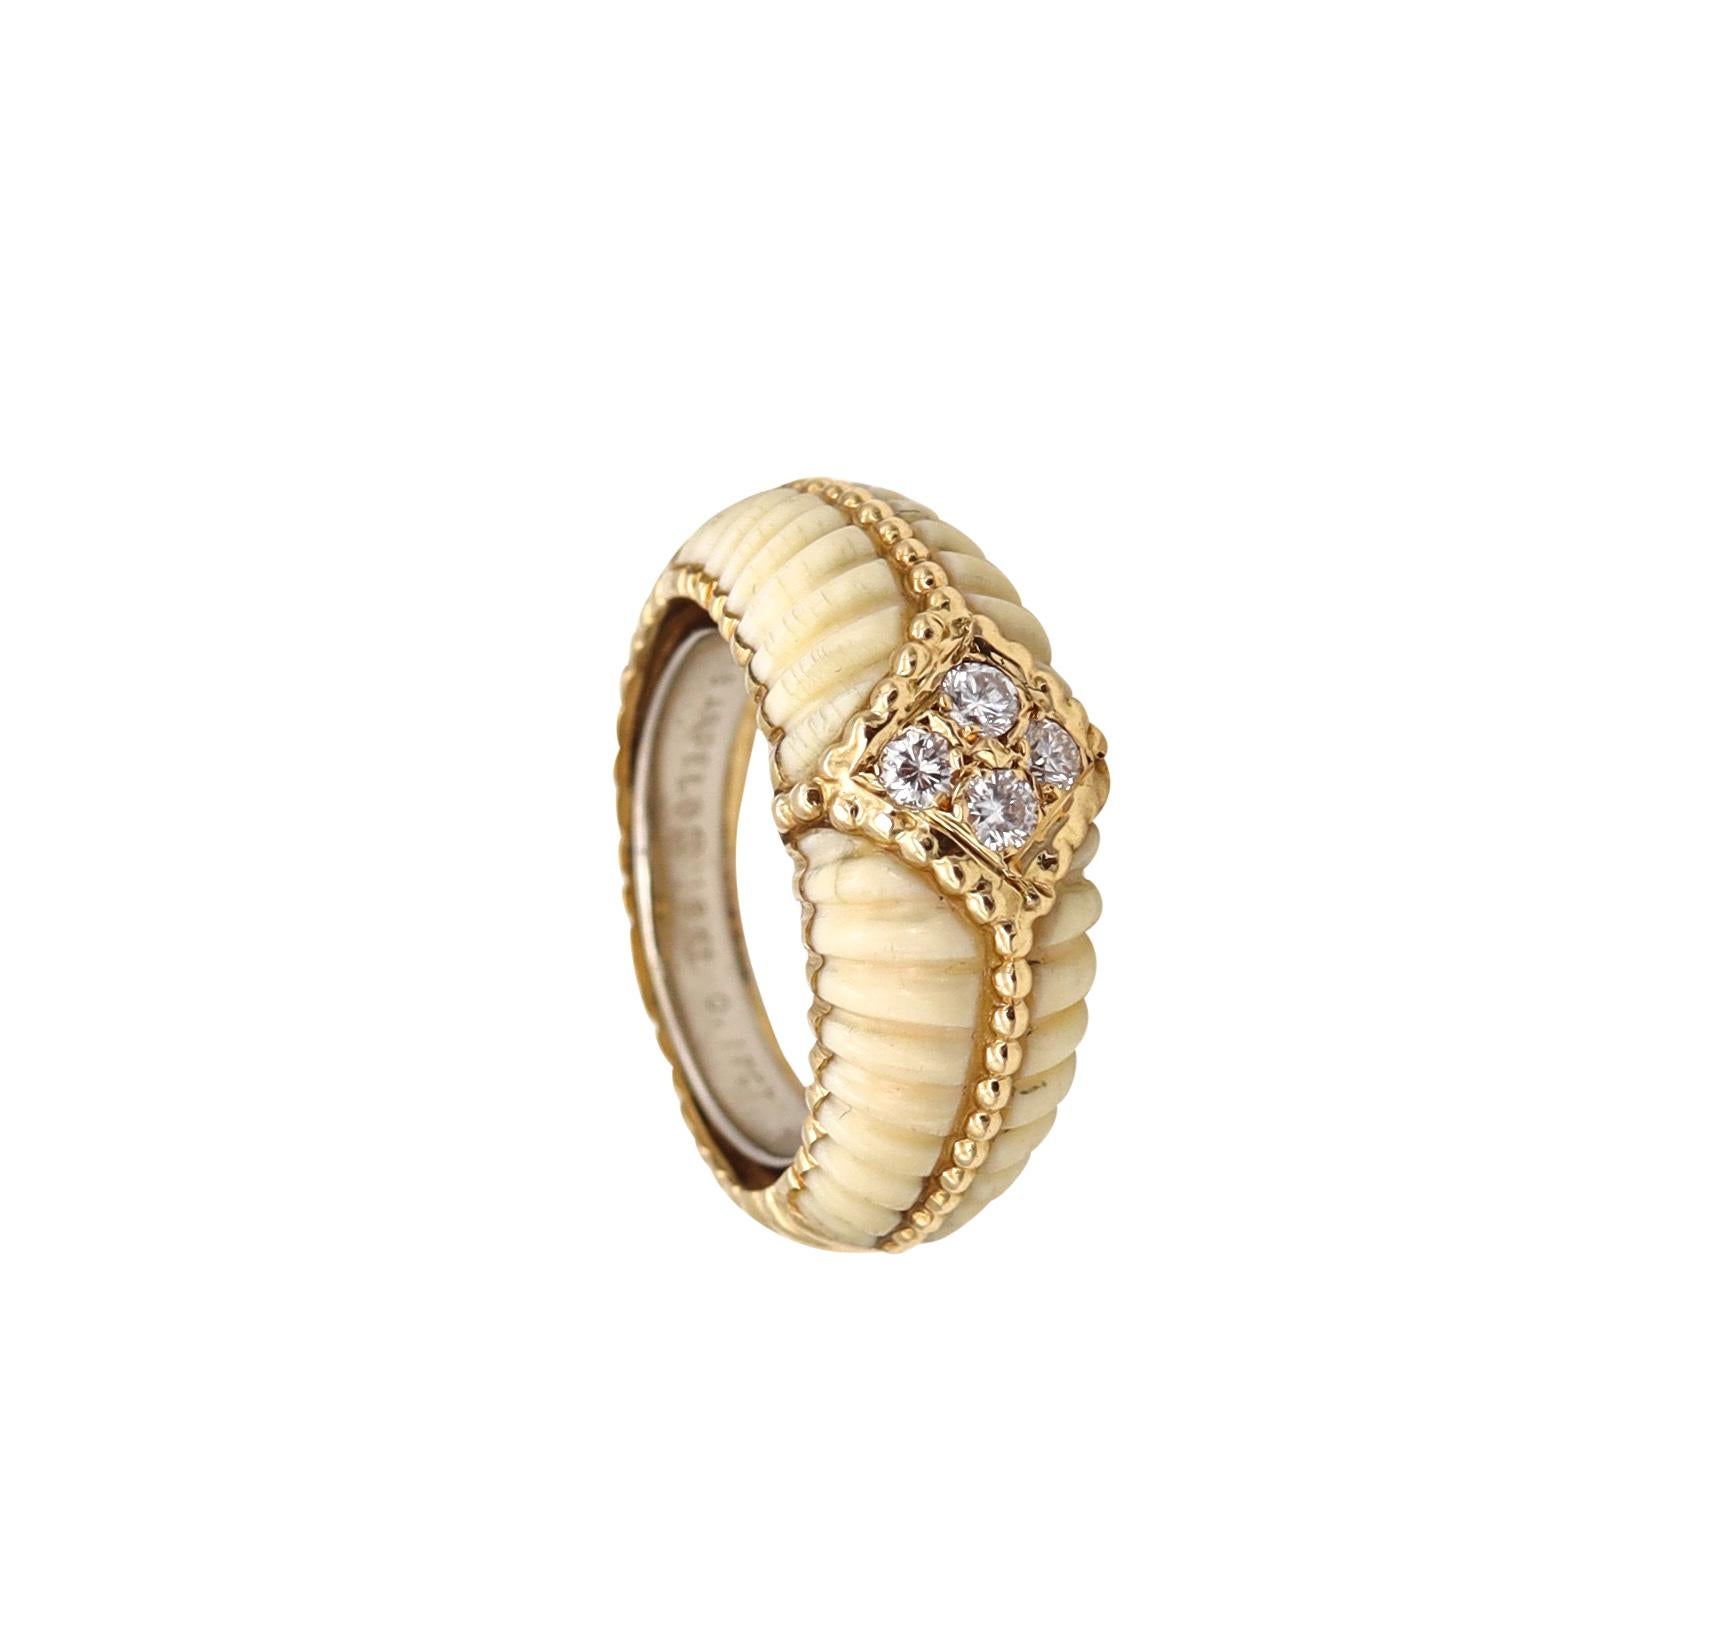 Women's Van Cleef & Arpels 1970 Paris Ring in 18Kt Gold with VS Diamonds and White Coral